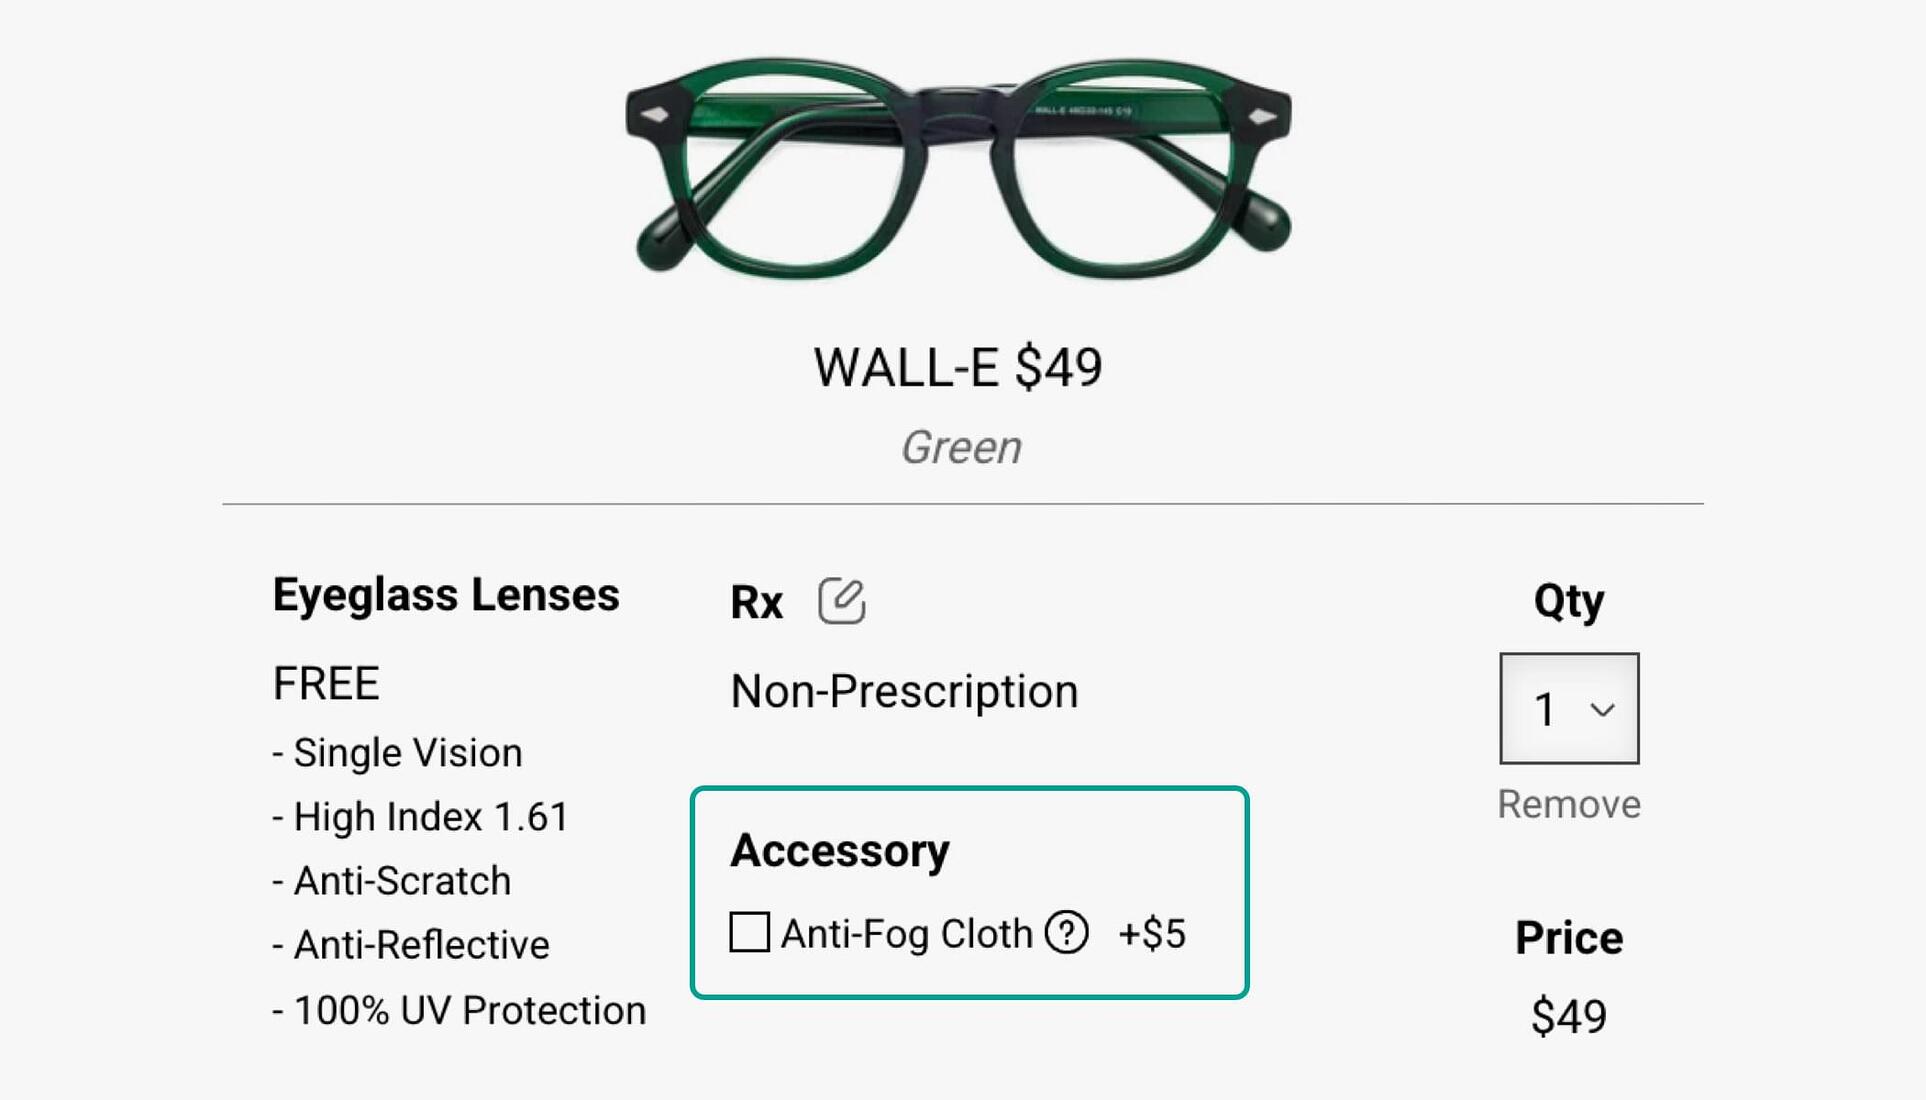 How to select anti-fog cloth on Yesglasses.